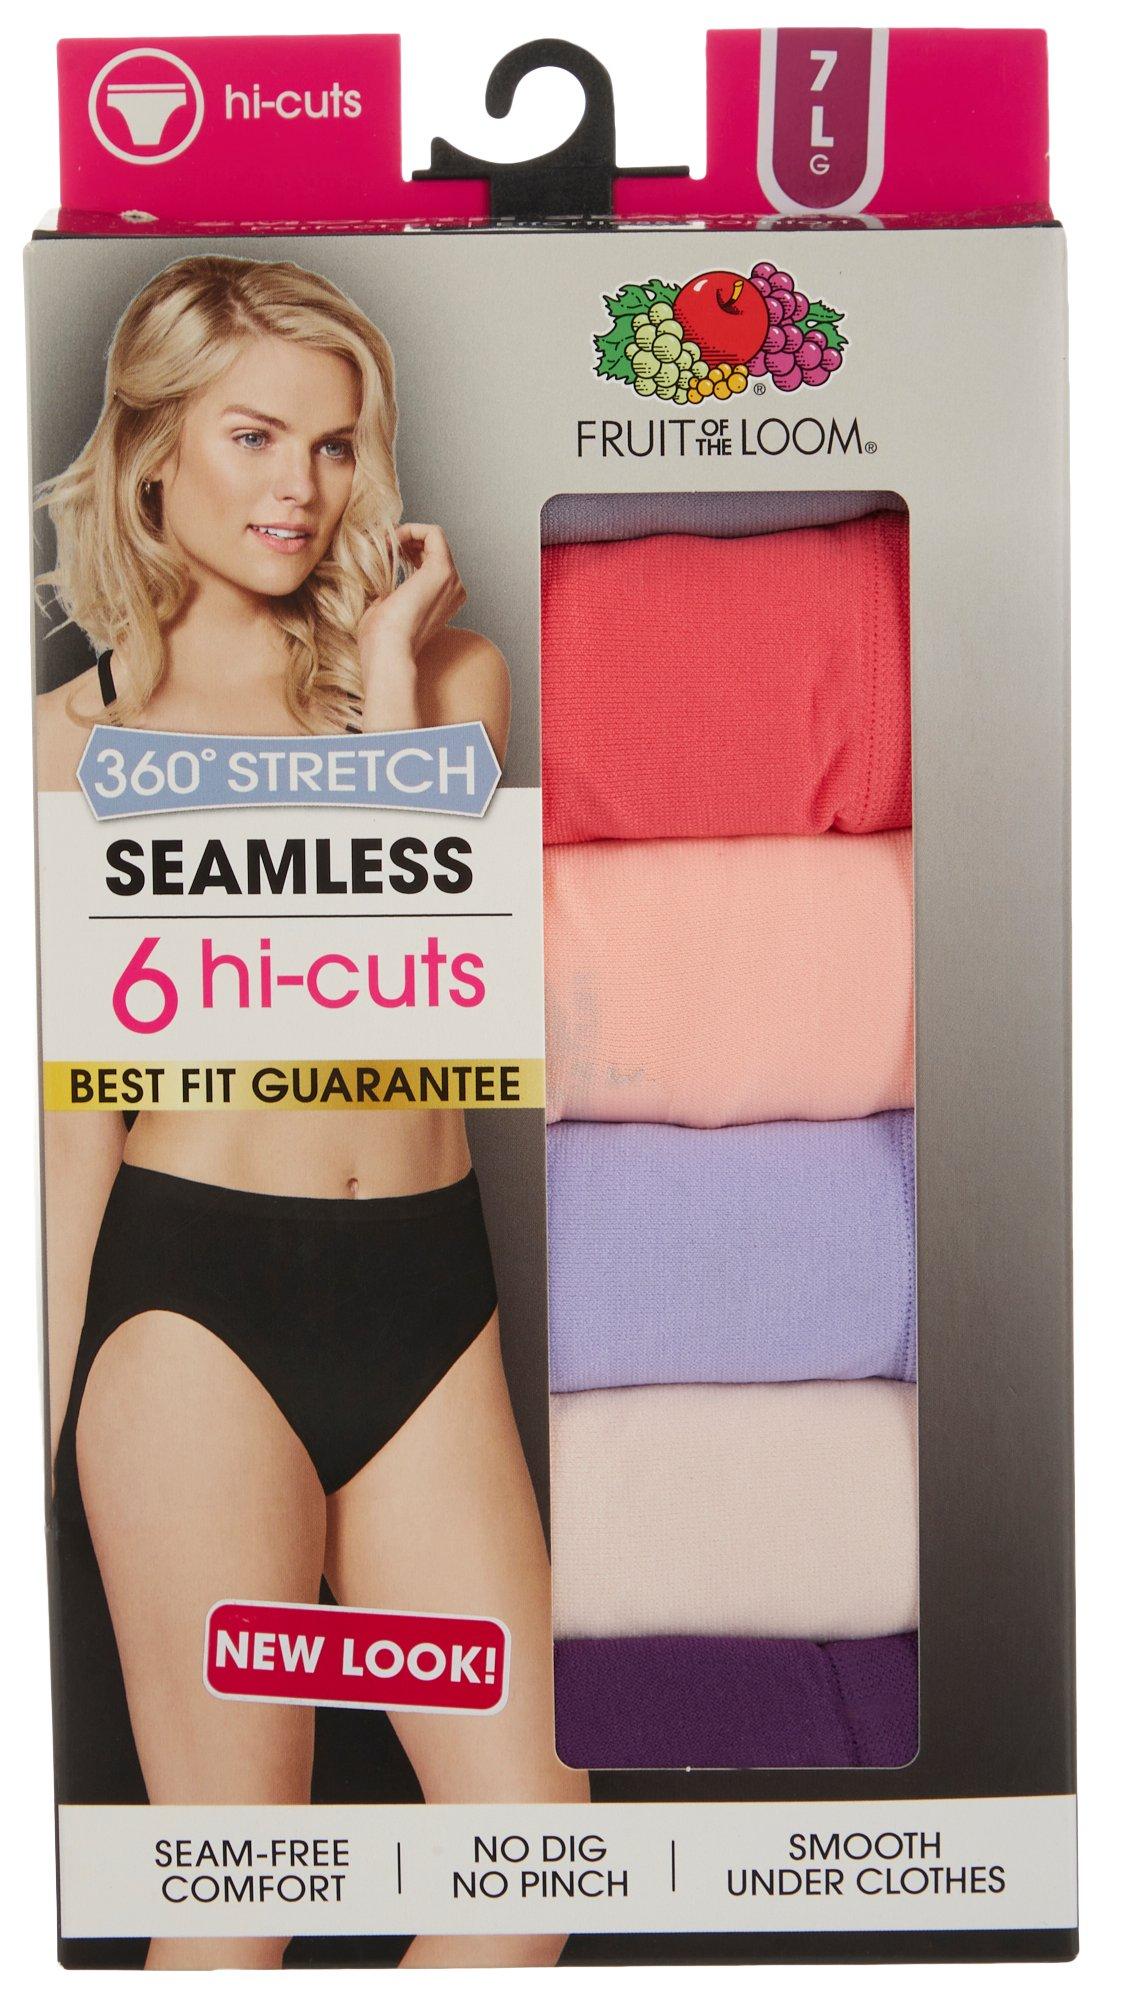 Fruit of the Loom Womens 6 Pk. Cooling Stripes Briefs